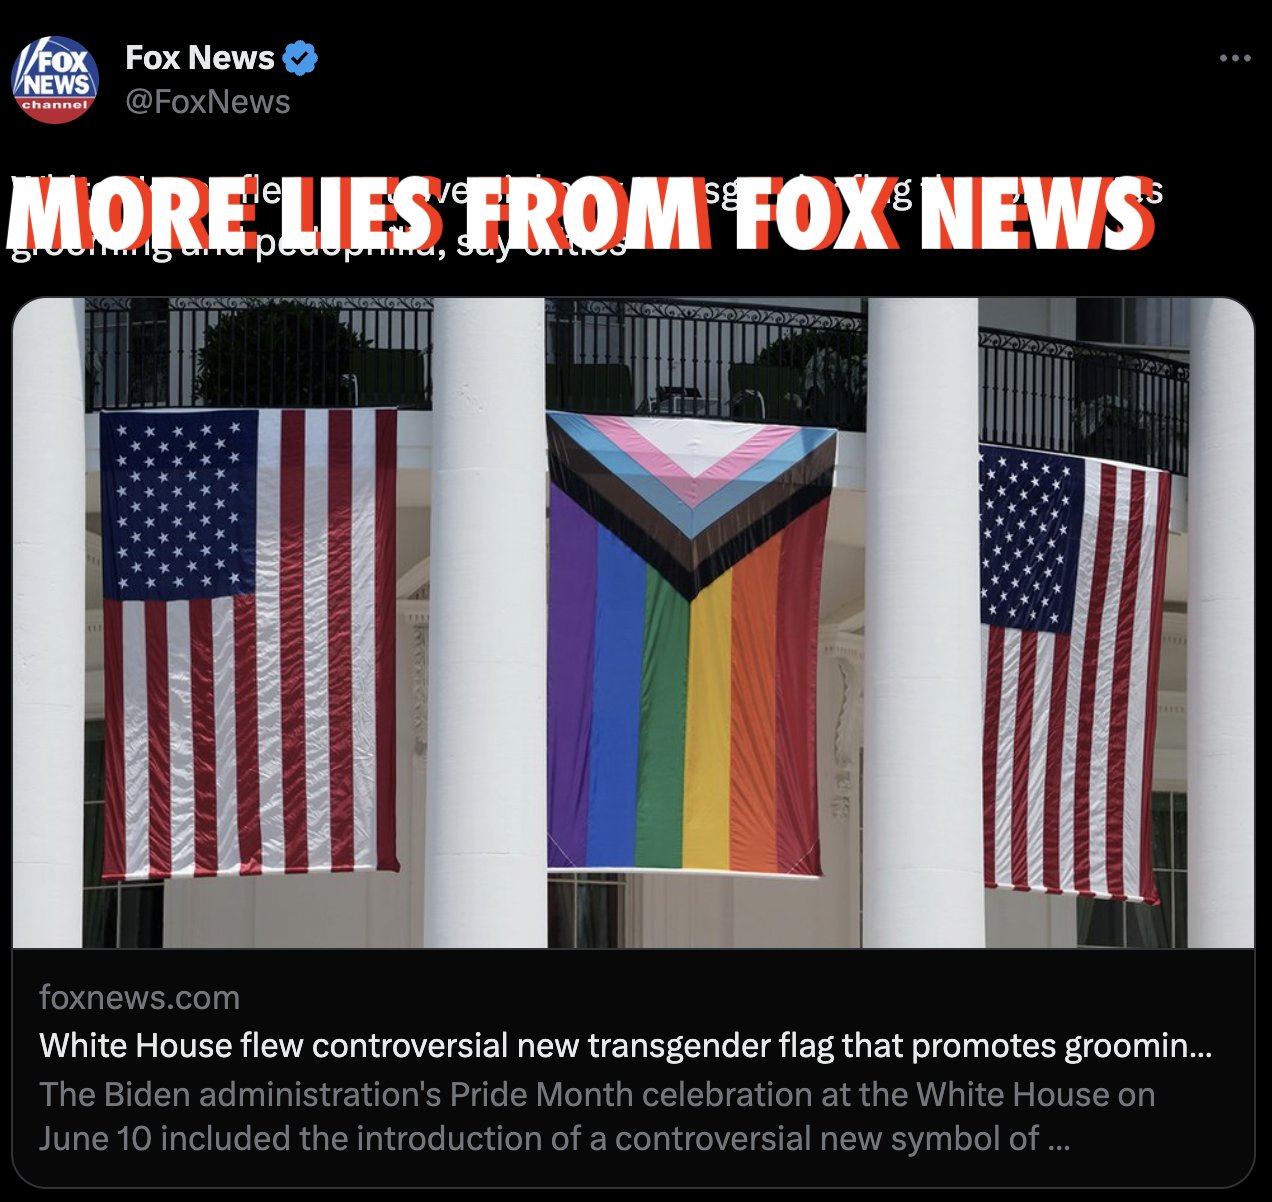 GLAAD on X: FACTS: Don't listen to this untrue, vile lie from Fox News.  The Progress Pride flag adds communities of color (Black and Brown  stripes), as well as pink, white, and